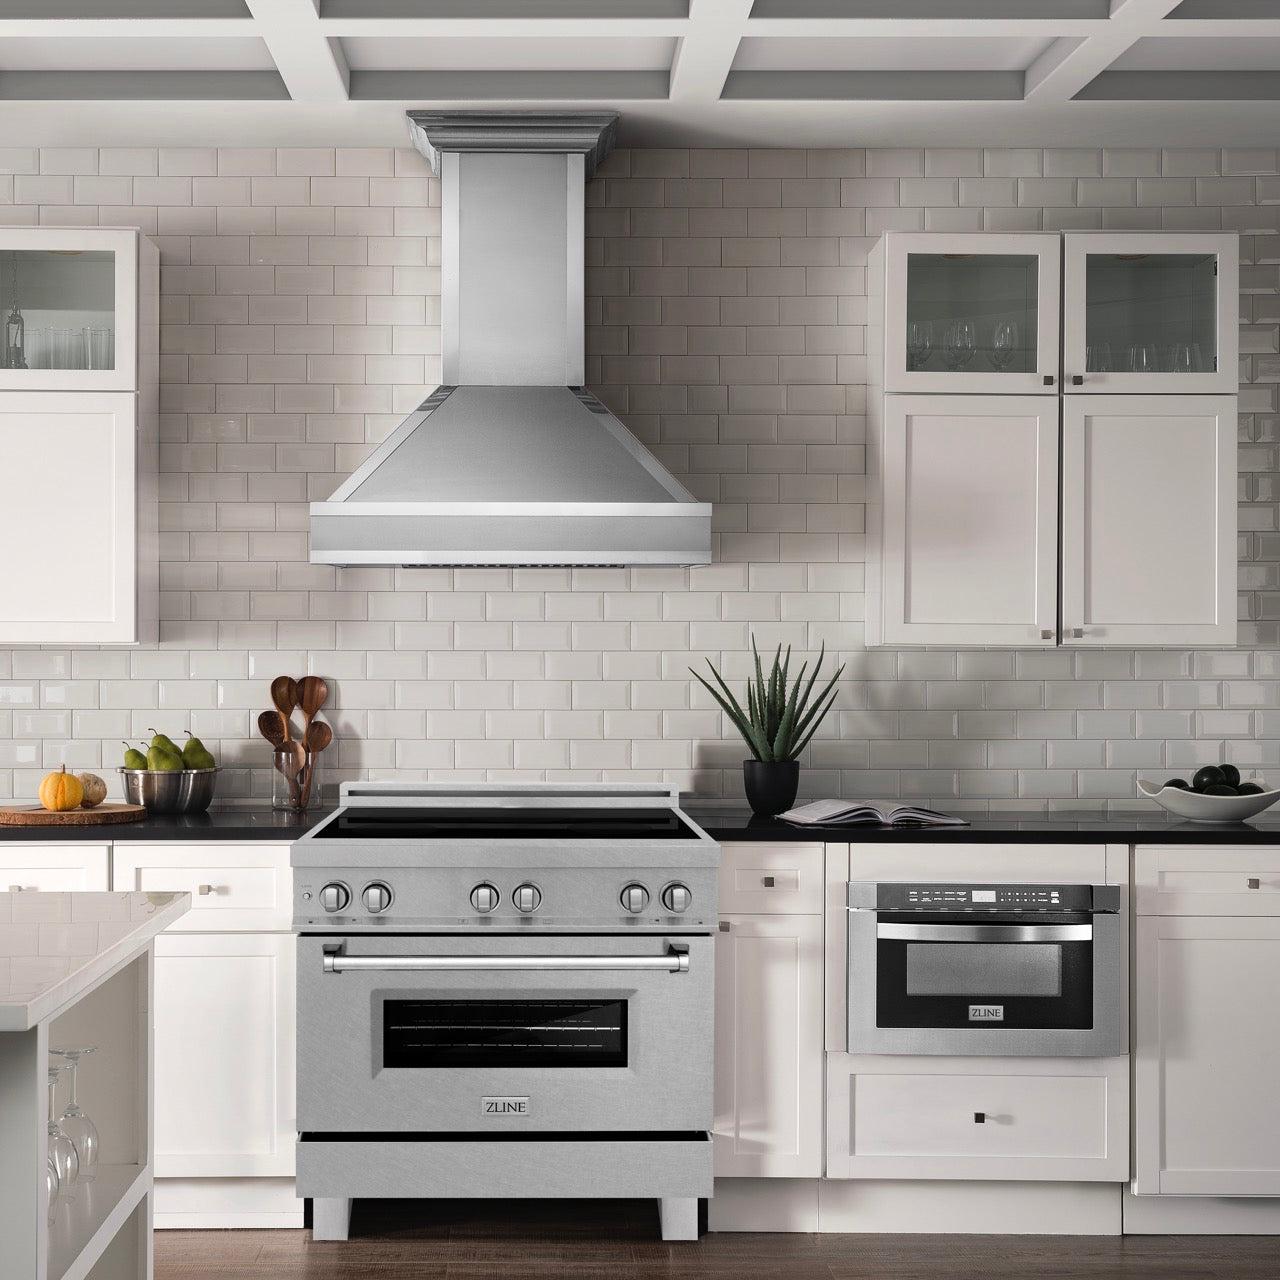 ZLINE 36 in. Induction Range in Fingerprint Resistant Stainless Steel (RAINDS-SN-36) in Rustic Farmhouse Kitchen with white cabinetry and backsplash with matching ZLINE Range Hood